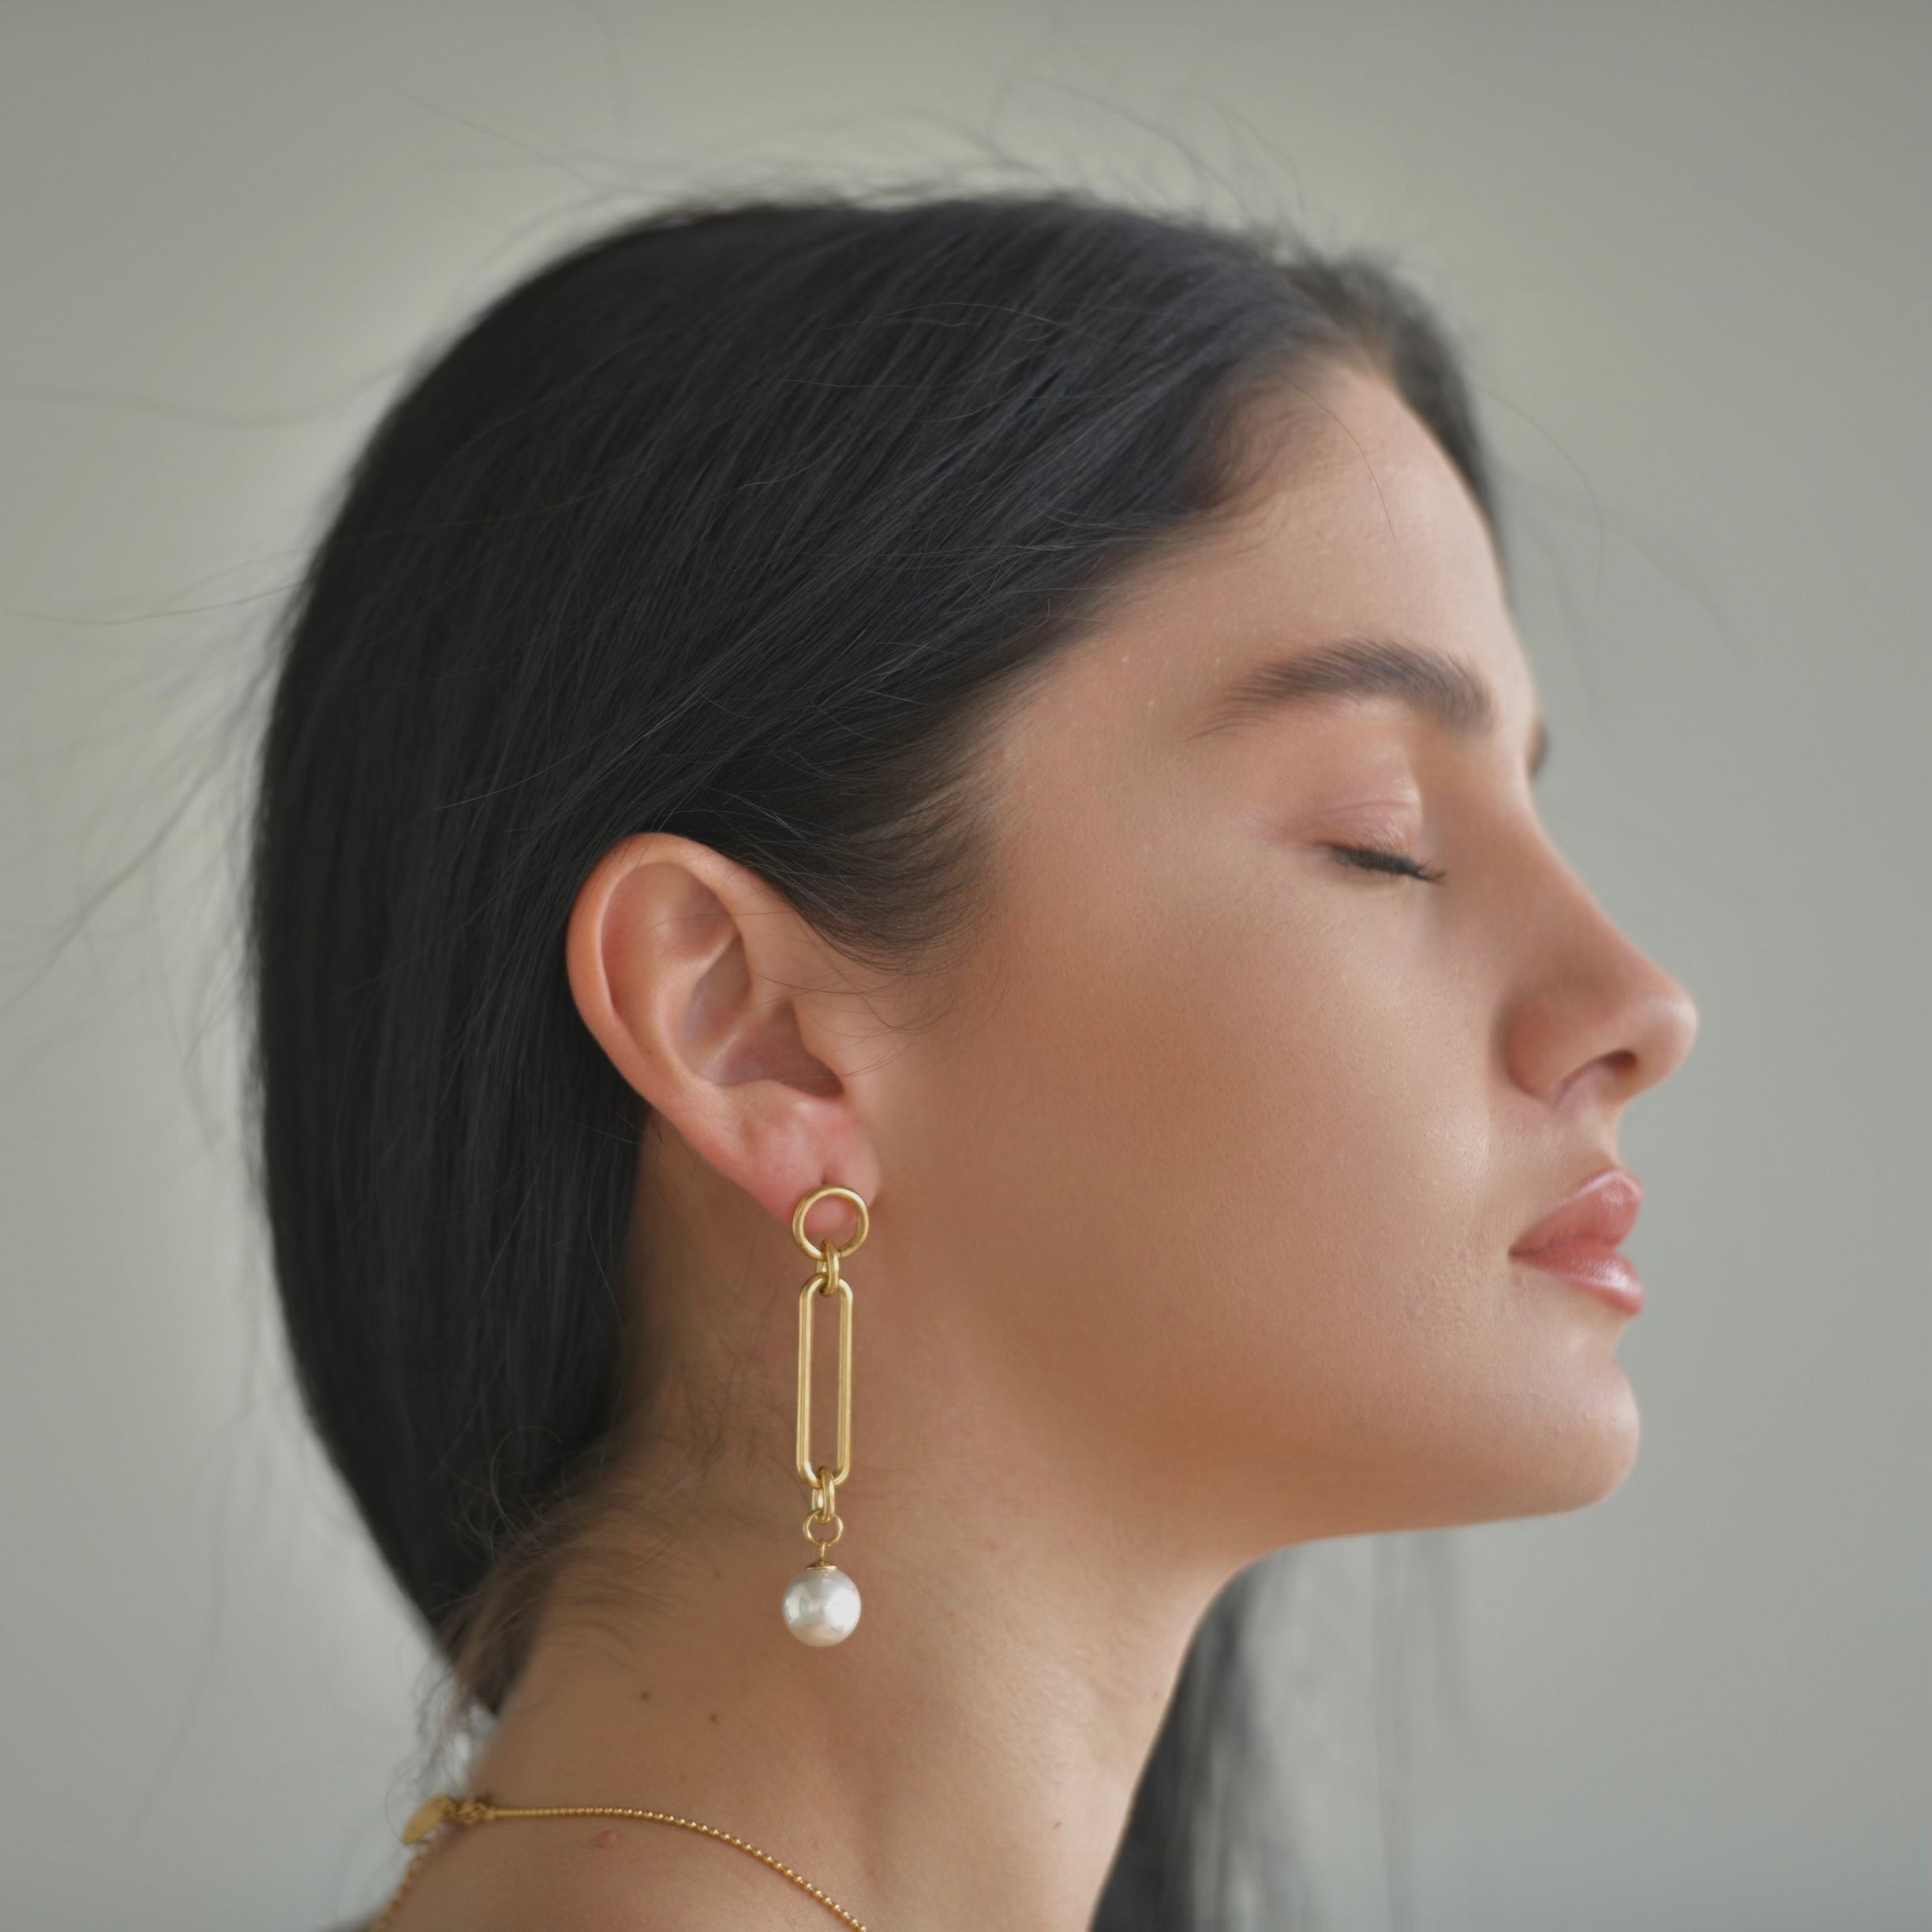 Gold plated earrings with a top small round hoop, a retacngle oval shape droping in the middle and a pearl droping at the bottom.